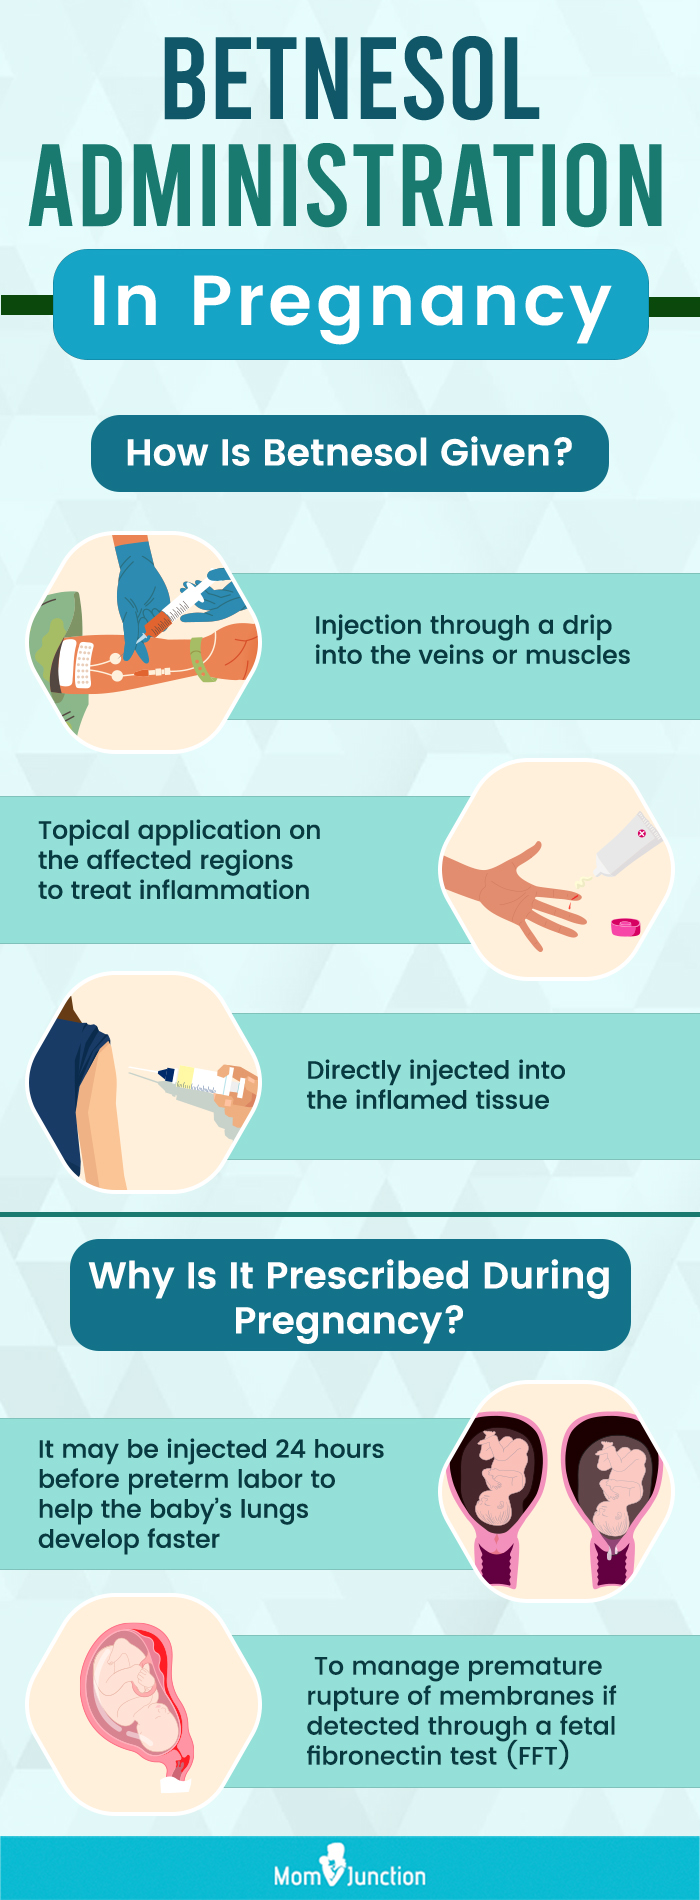 betnesol administration in pregnancy (infographic)